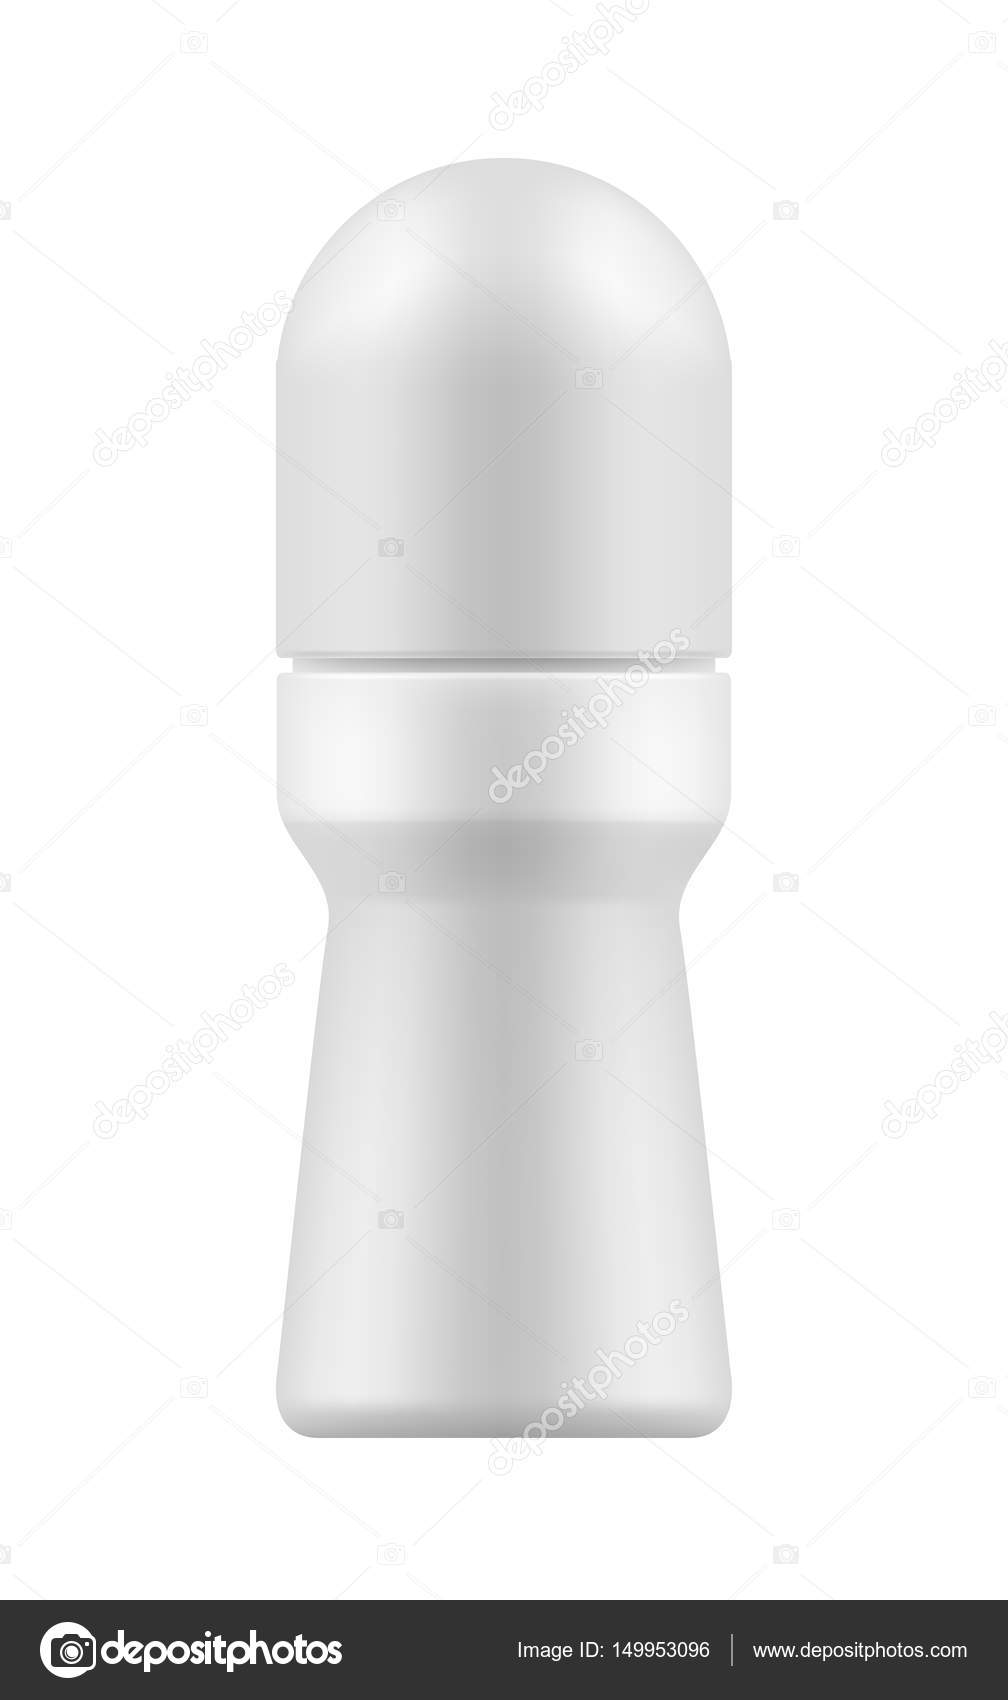 Download Realistic Bottle With Roll On Deodorant Vector Image By C Nastya Mal Vector Stock 149953096